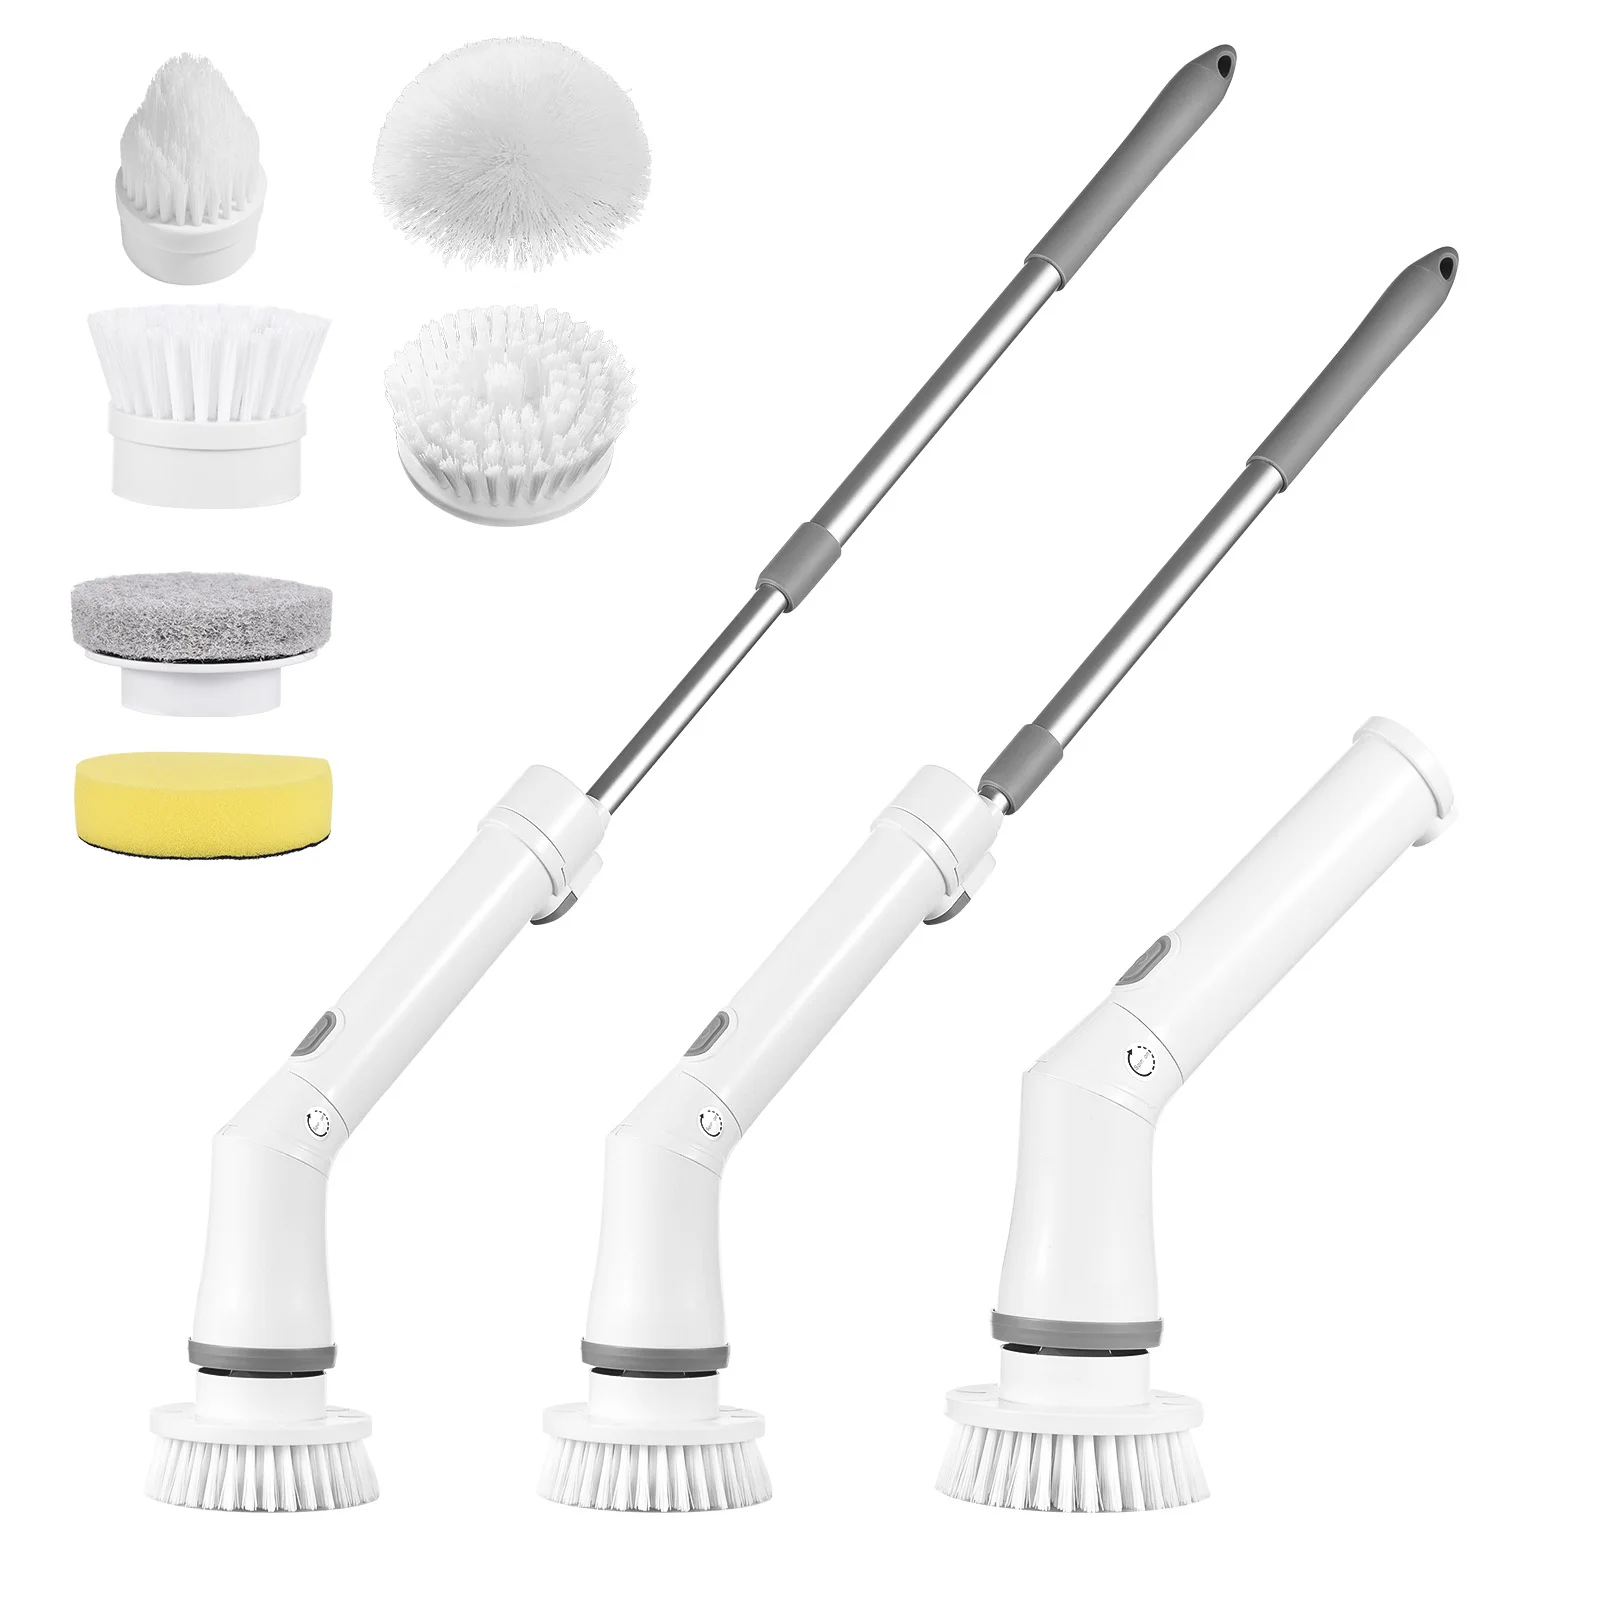 https://ae01.alicdn.com/kf/S04b01ddb5360469091f2018df6692f03E/Electric-Spin-Scrubber-Handheld-Cordless-Electric-Cleaning-Brush-Electric-Spin-Cleaner-2-Speeds-with-6-Replaceable.jpg